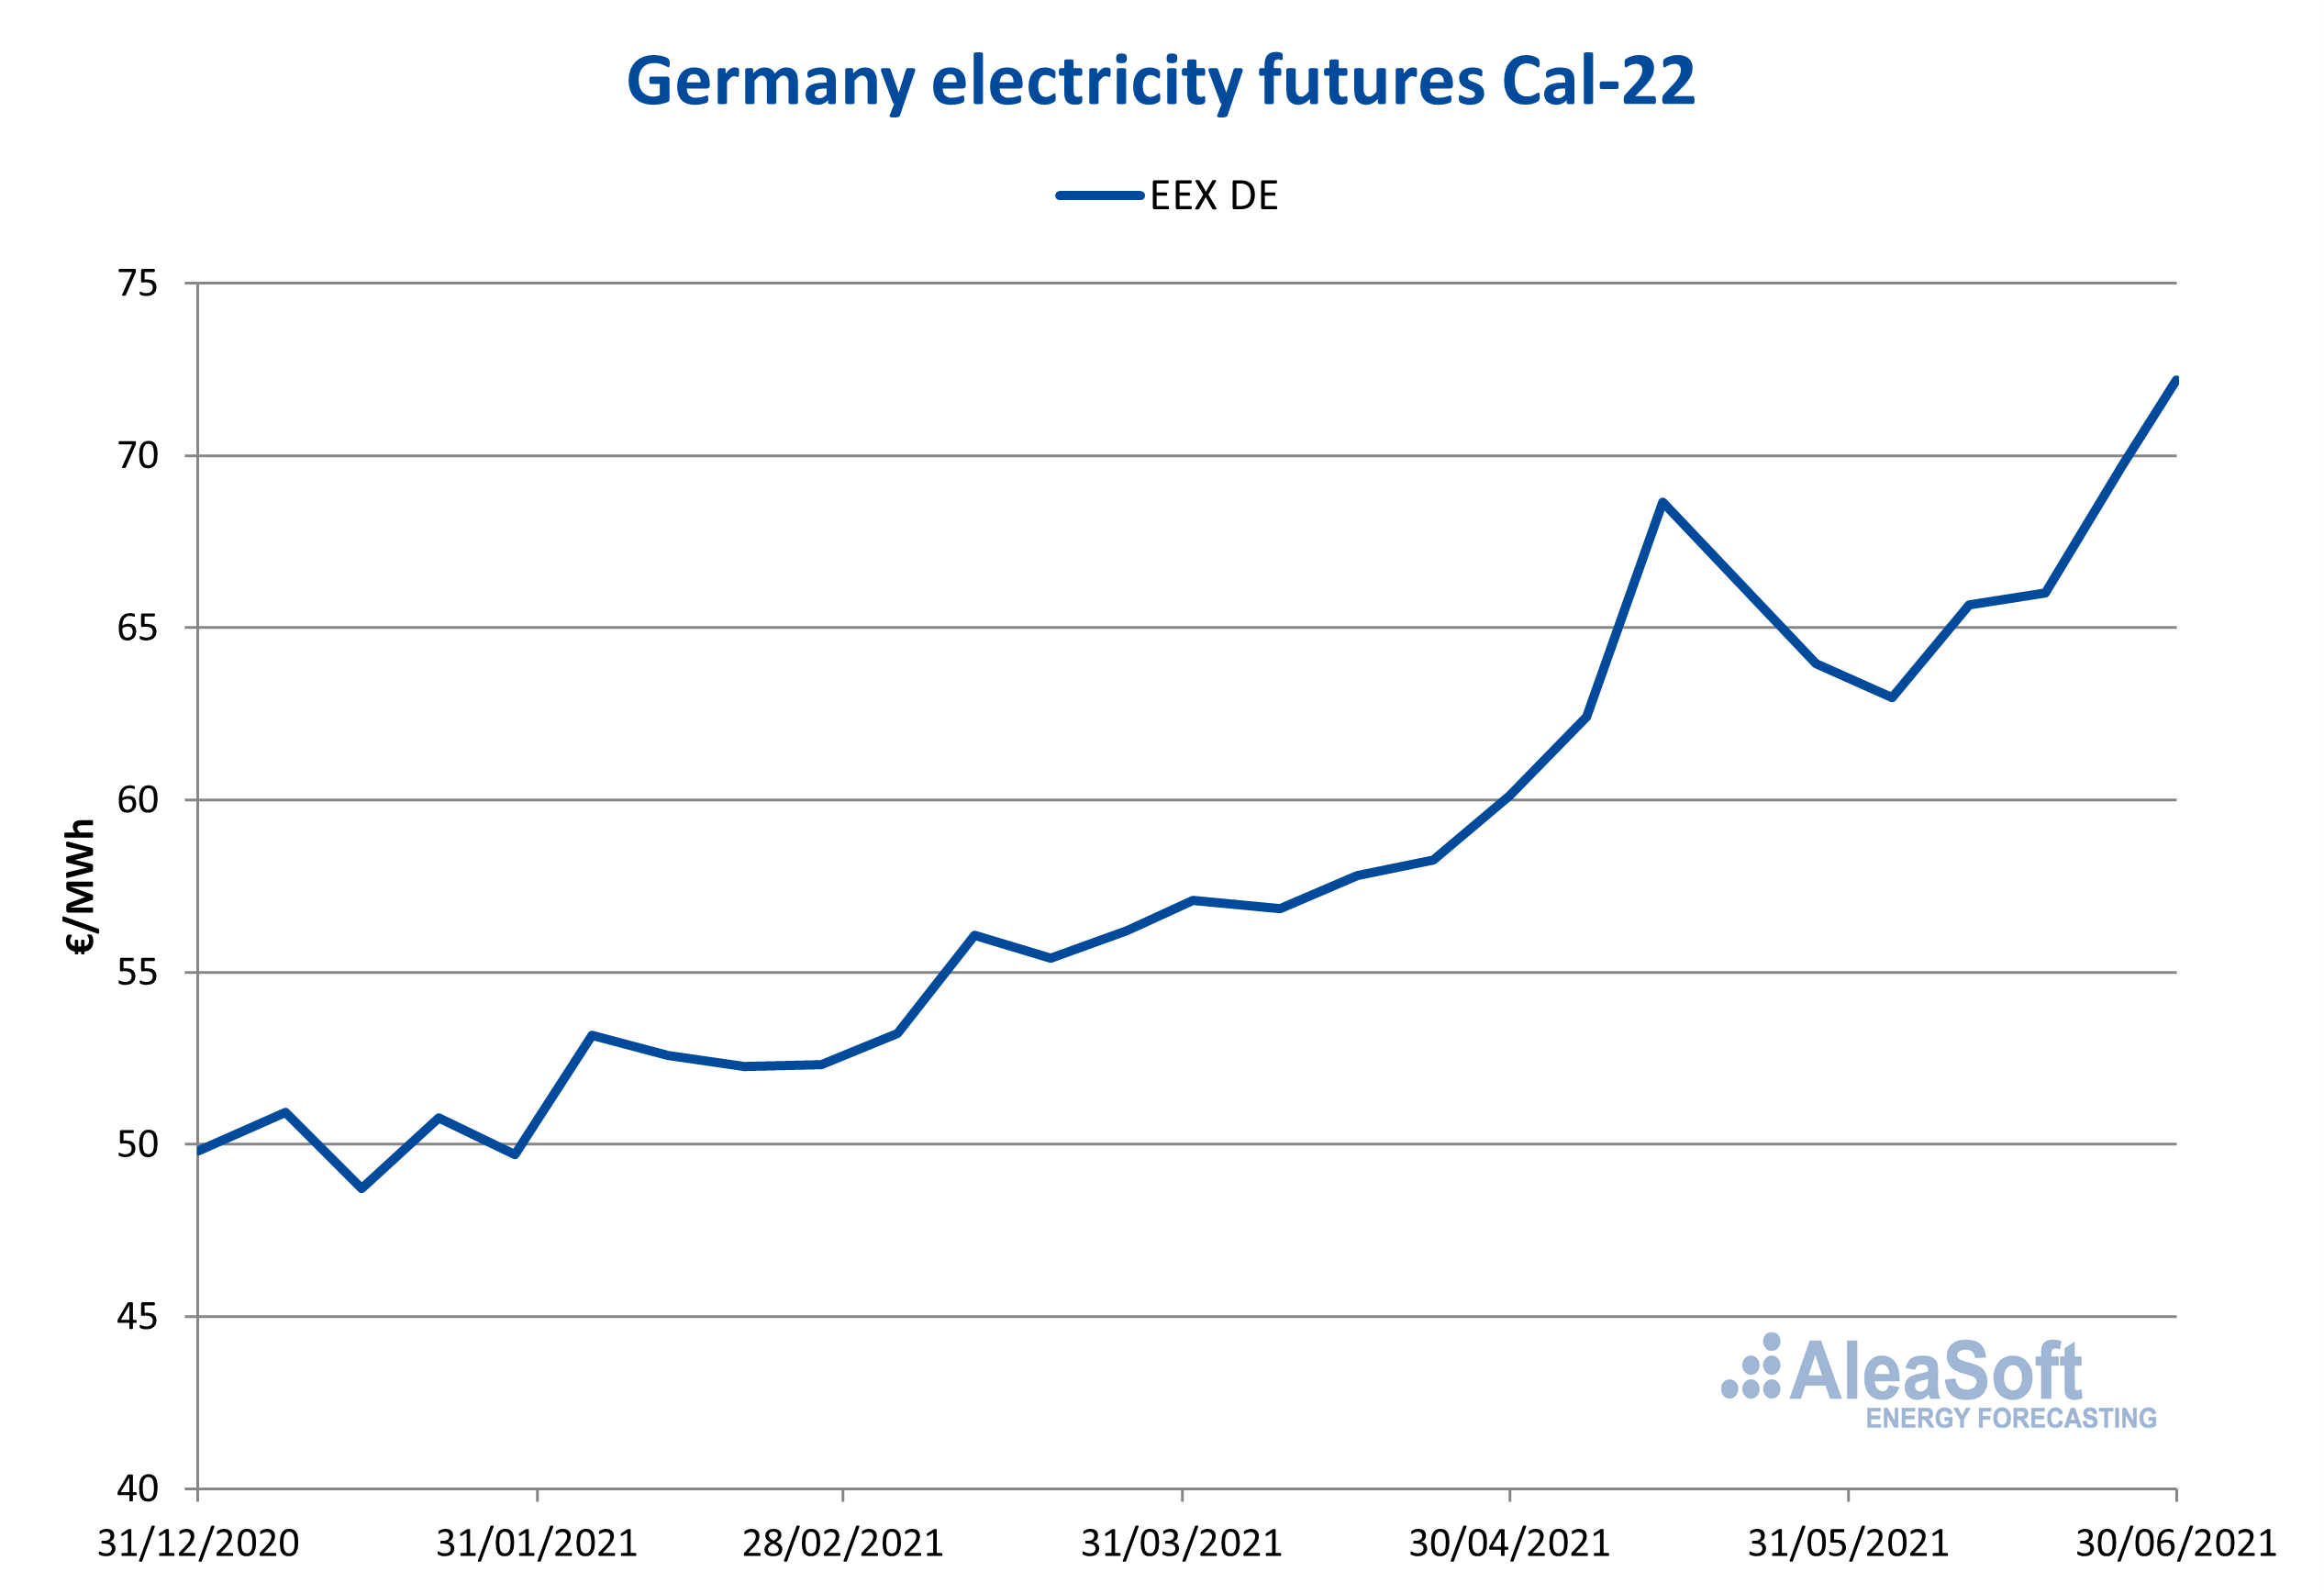 AleaSoft - Electricity futures cal 22 germany